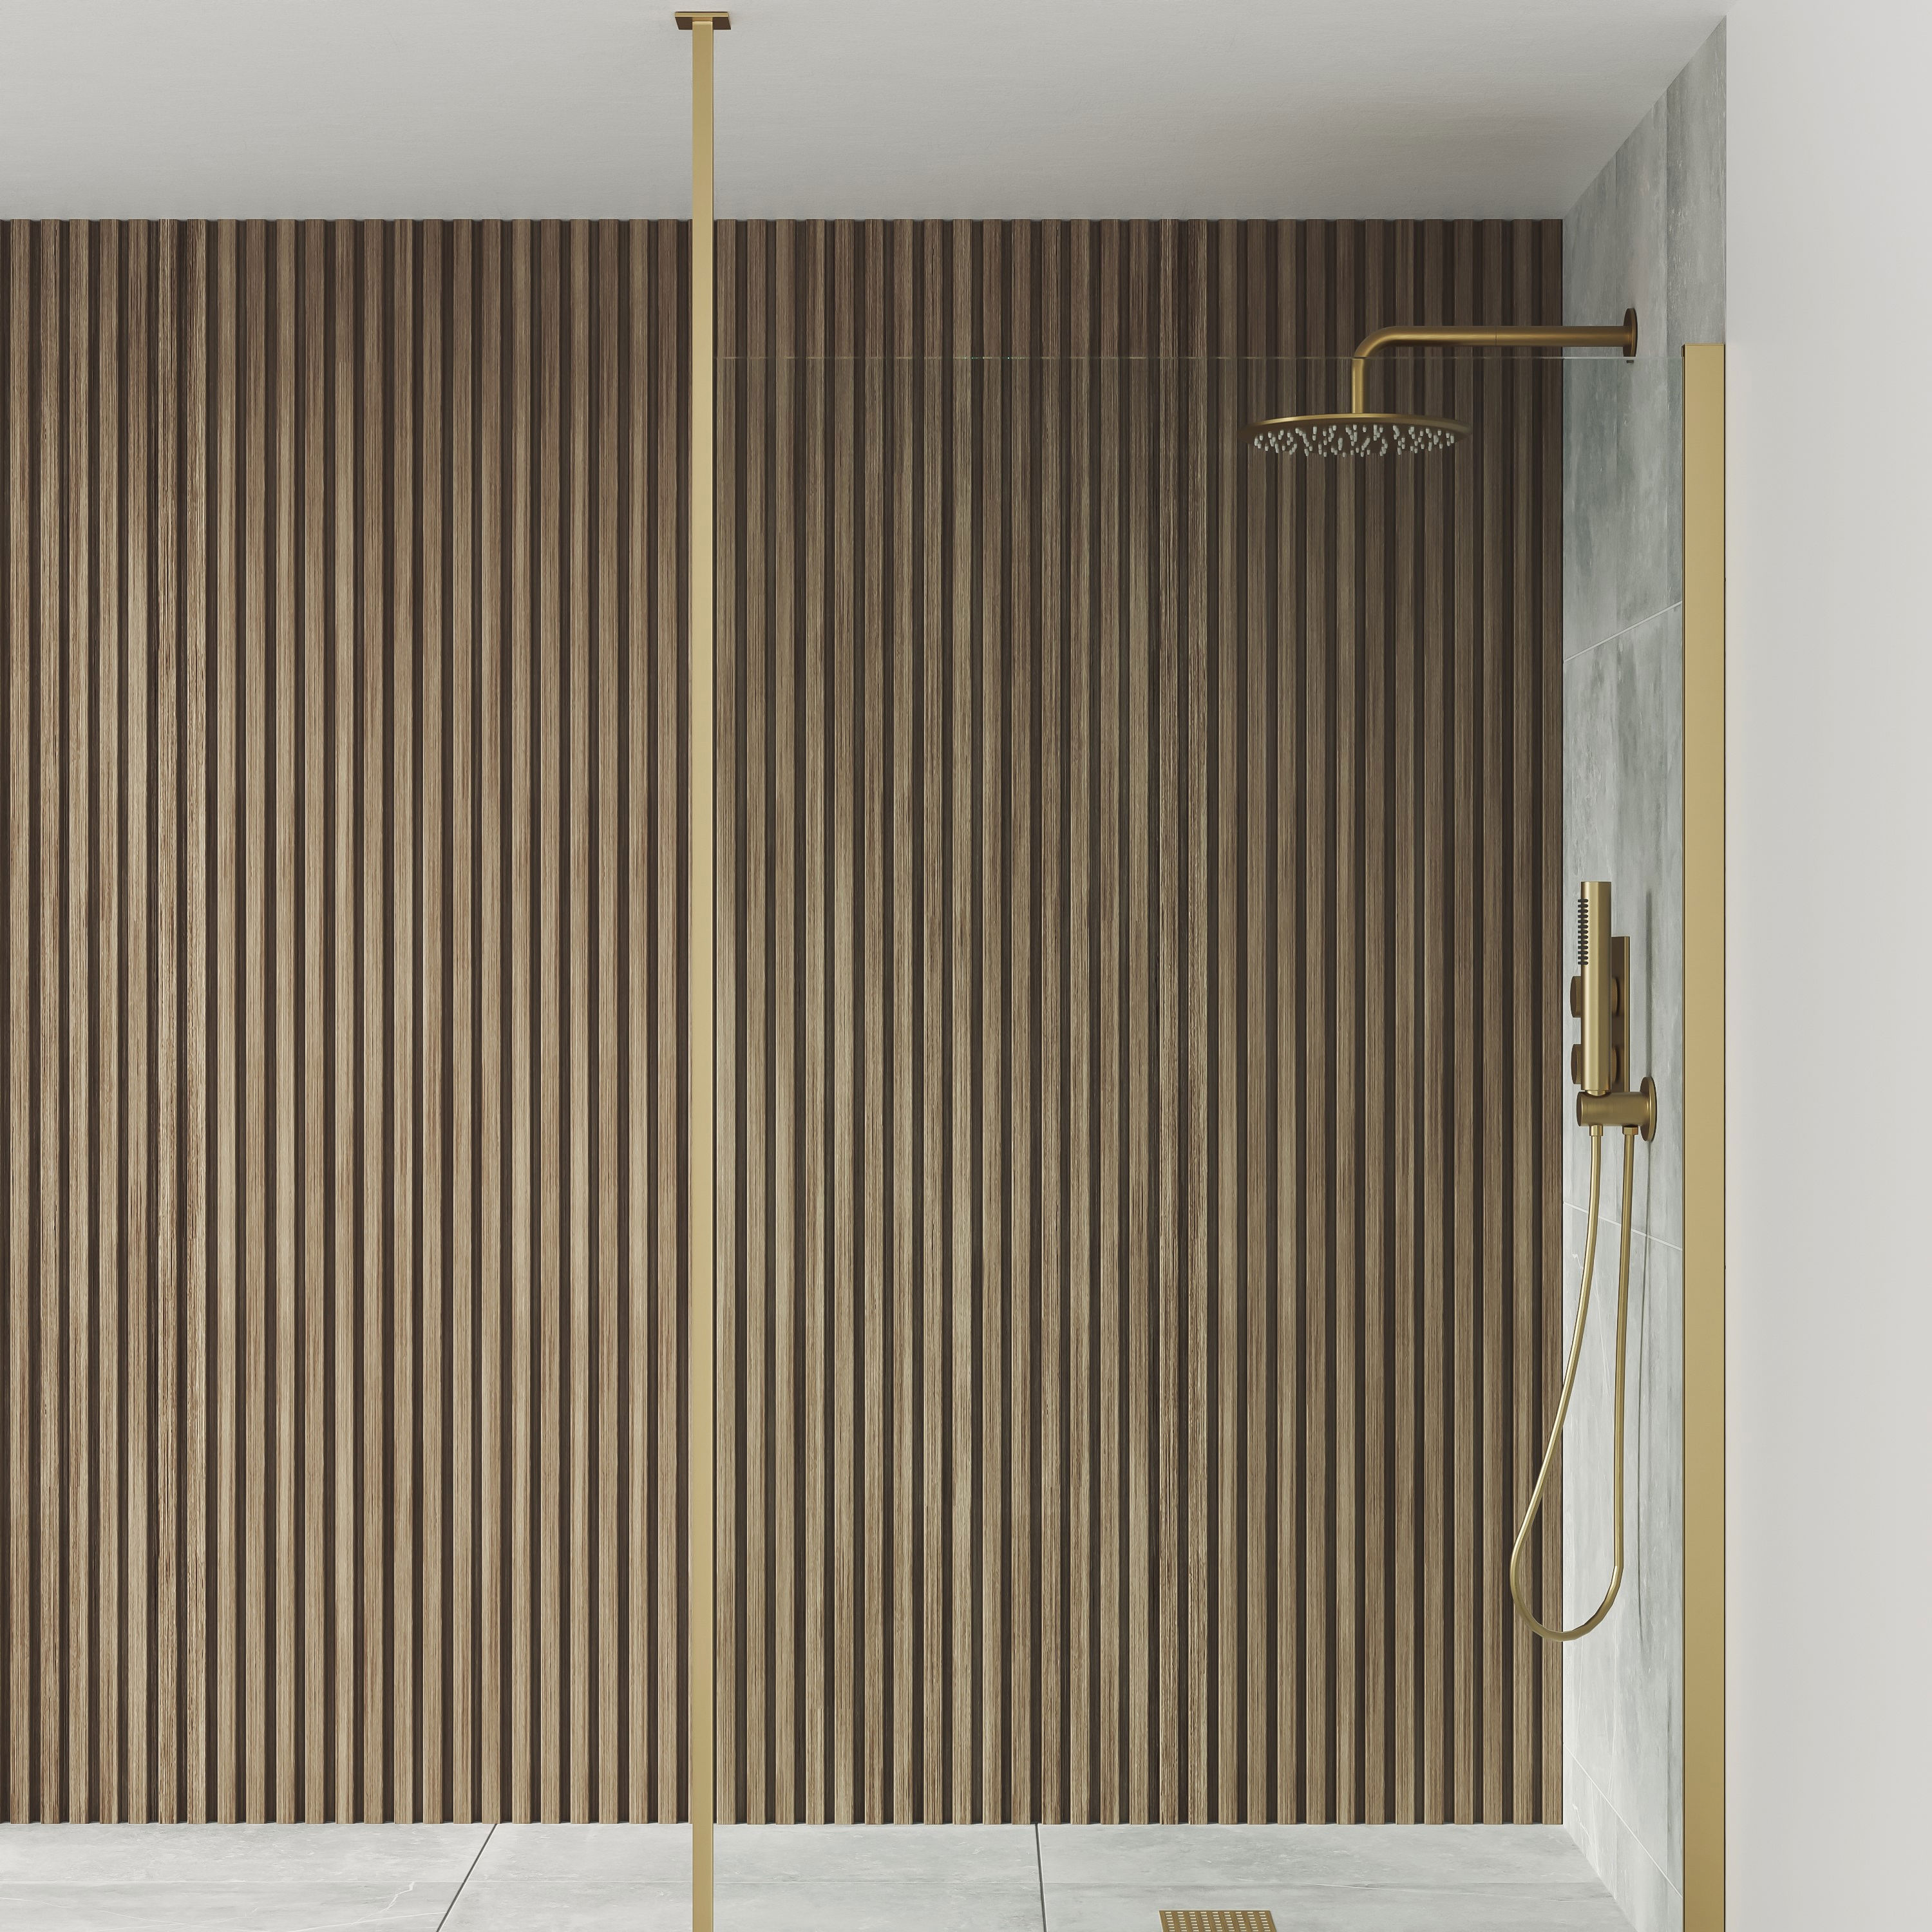 How to Install Bathroom Wall Panels